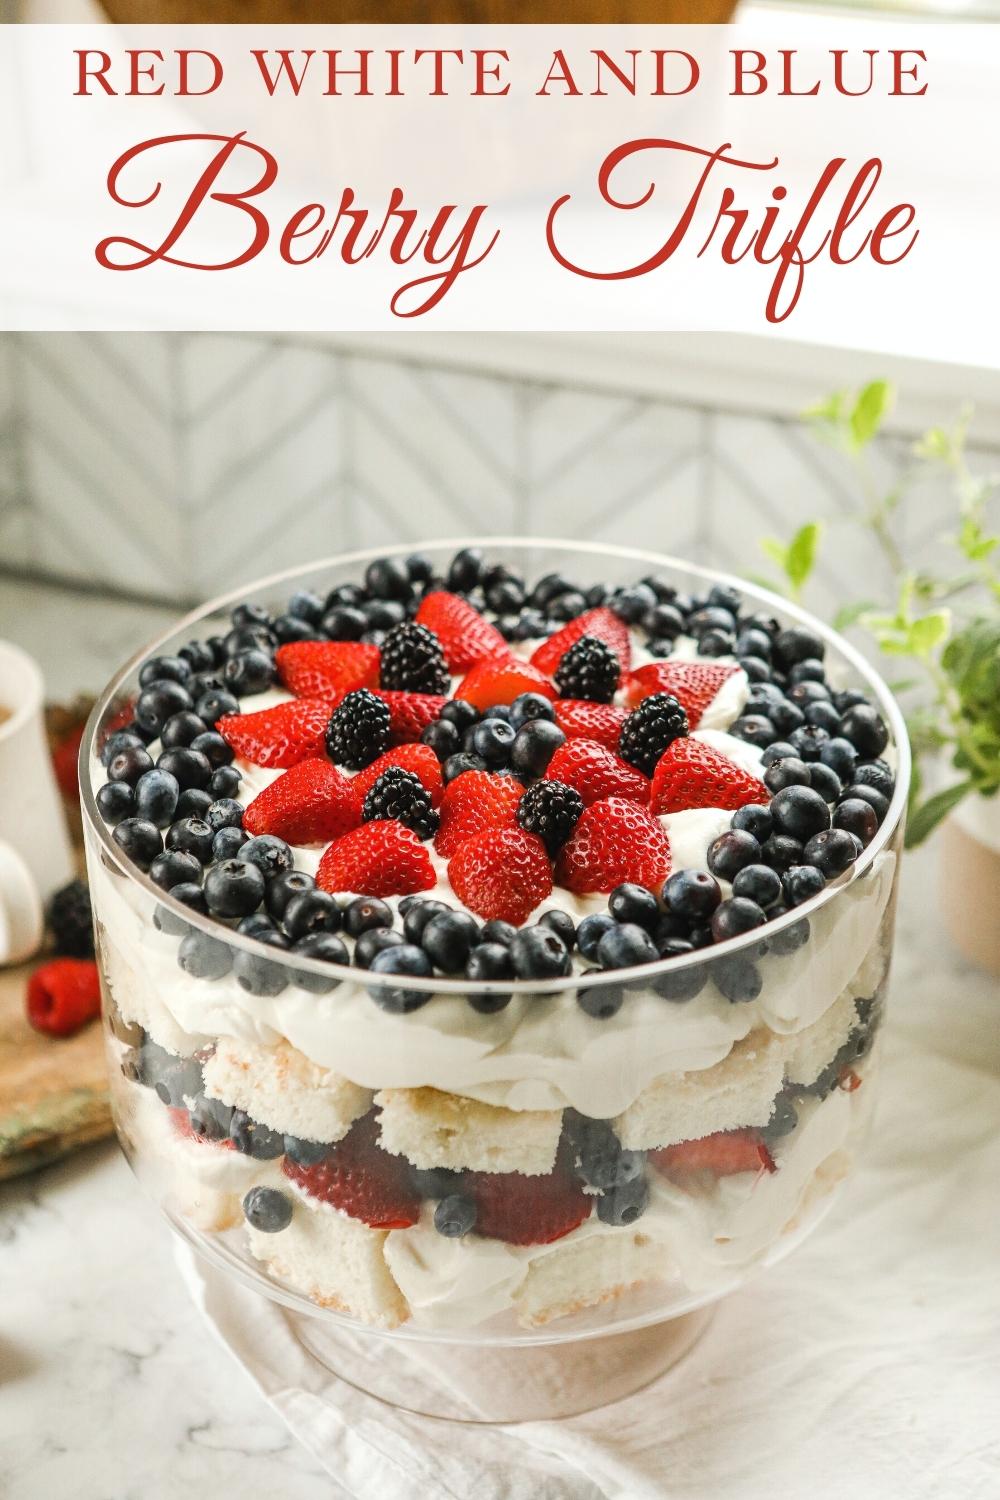 Recipe for Berry Trifle | Red White and Blue Trifle